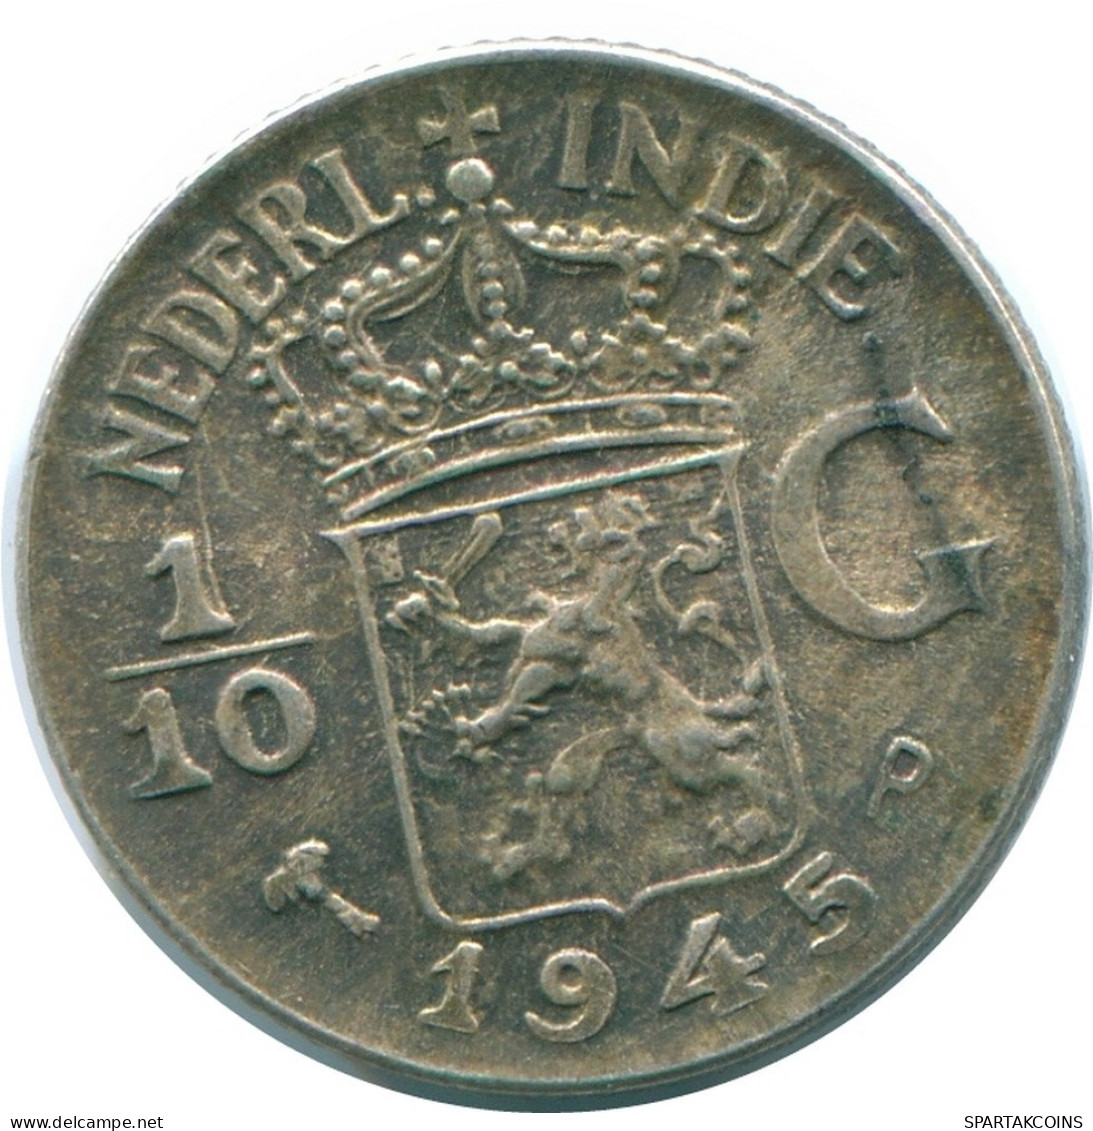 1/10 GULDEN 1945 P NETHERLANDS EAST INDIES SILVER Colonial Coin #NL14186.3.U.A - Dutch East Indies